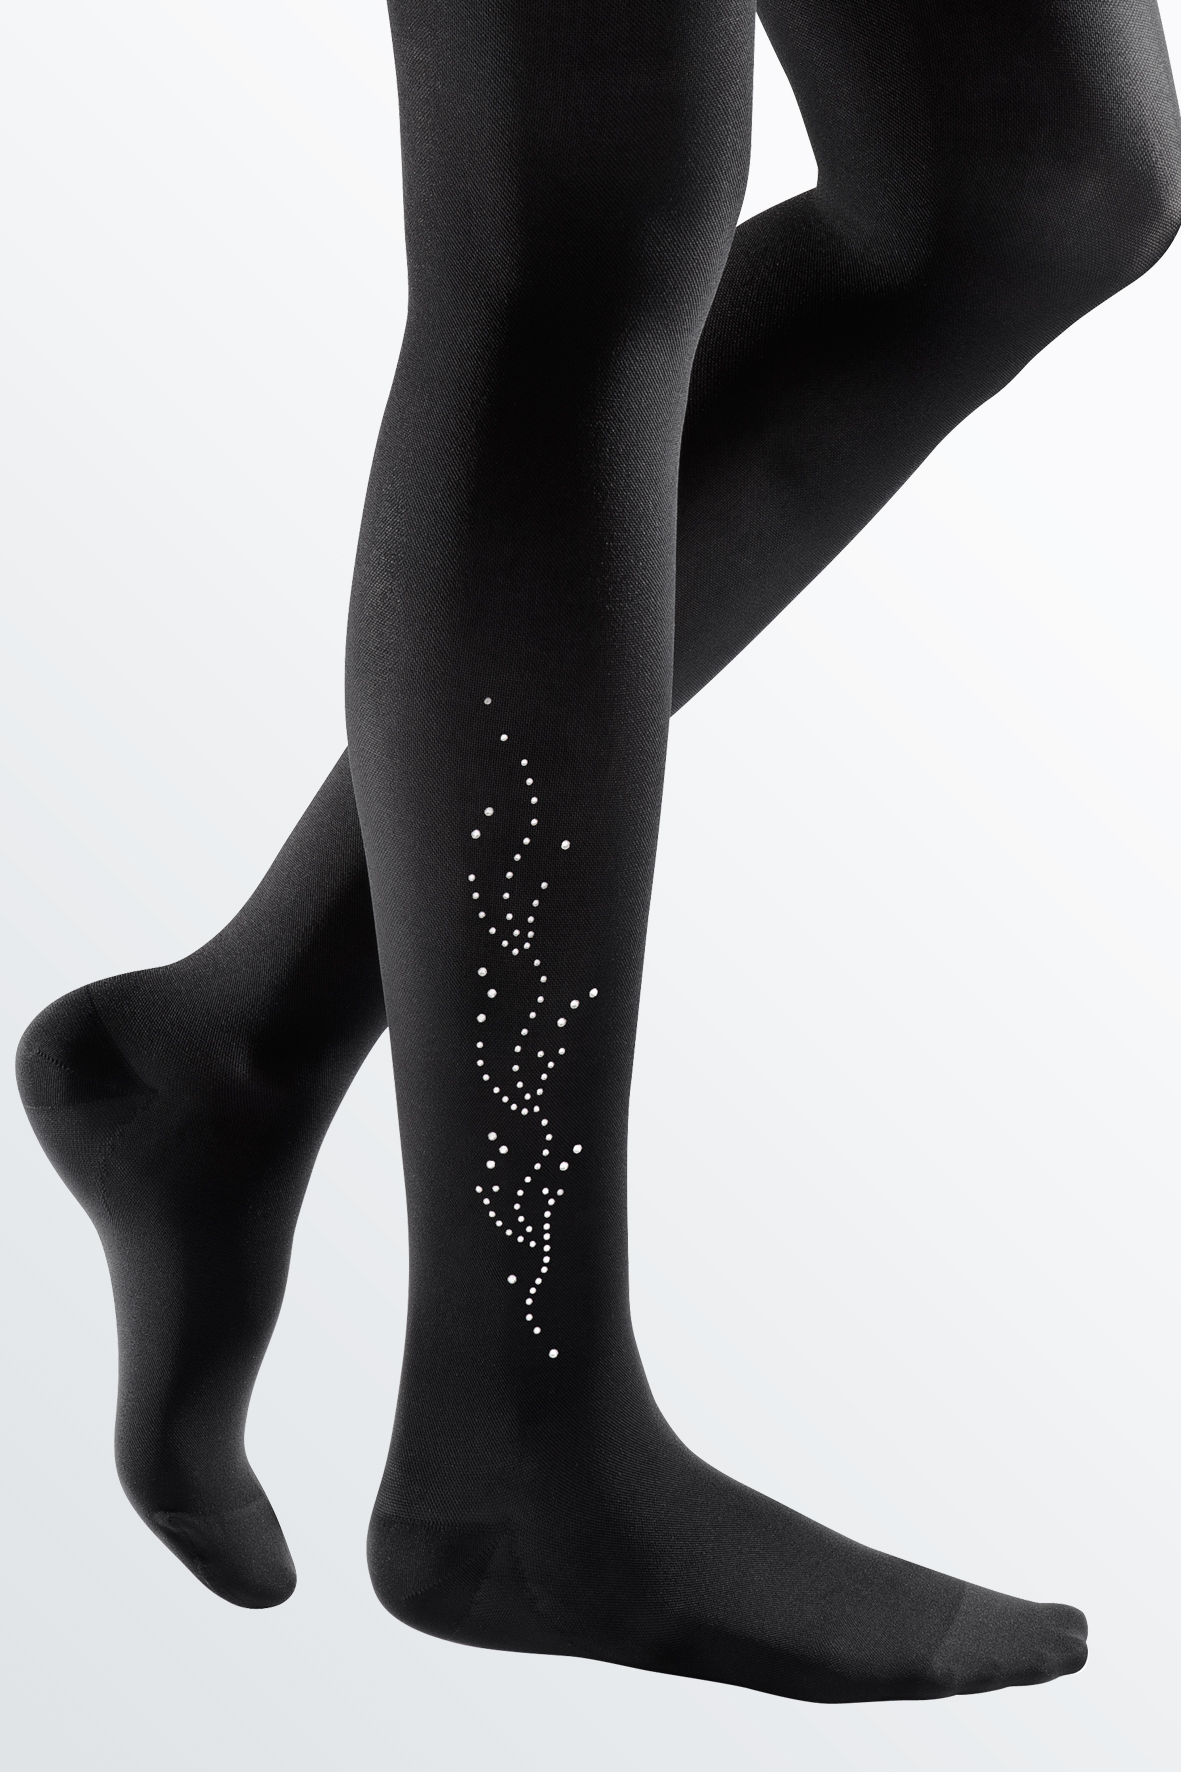 Firm Compression Stockings – Compression Levels Series Part 3